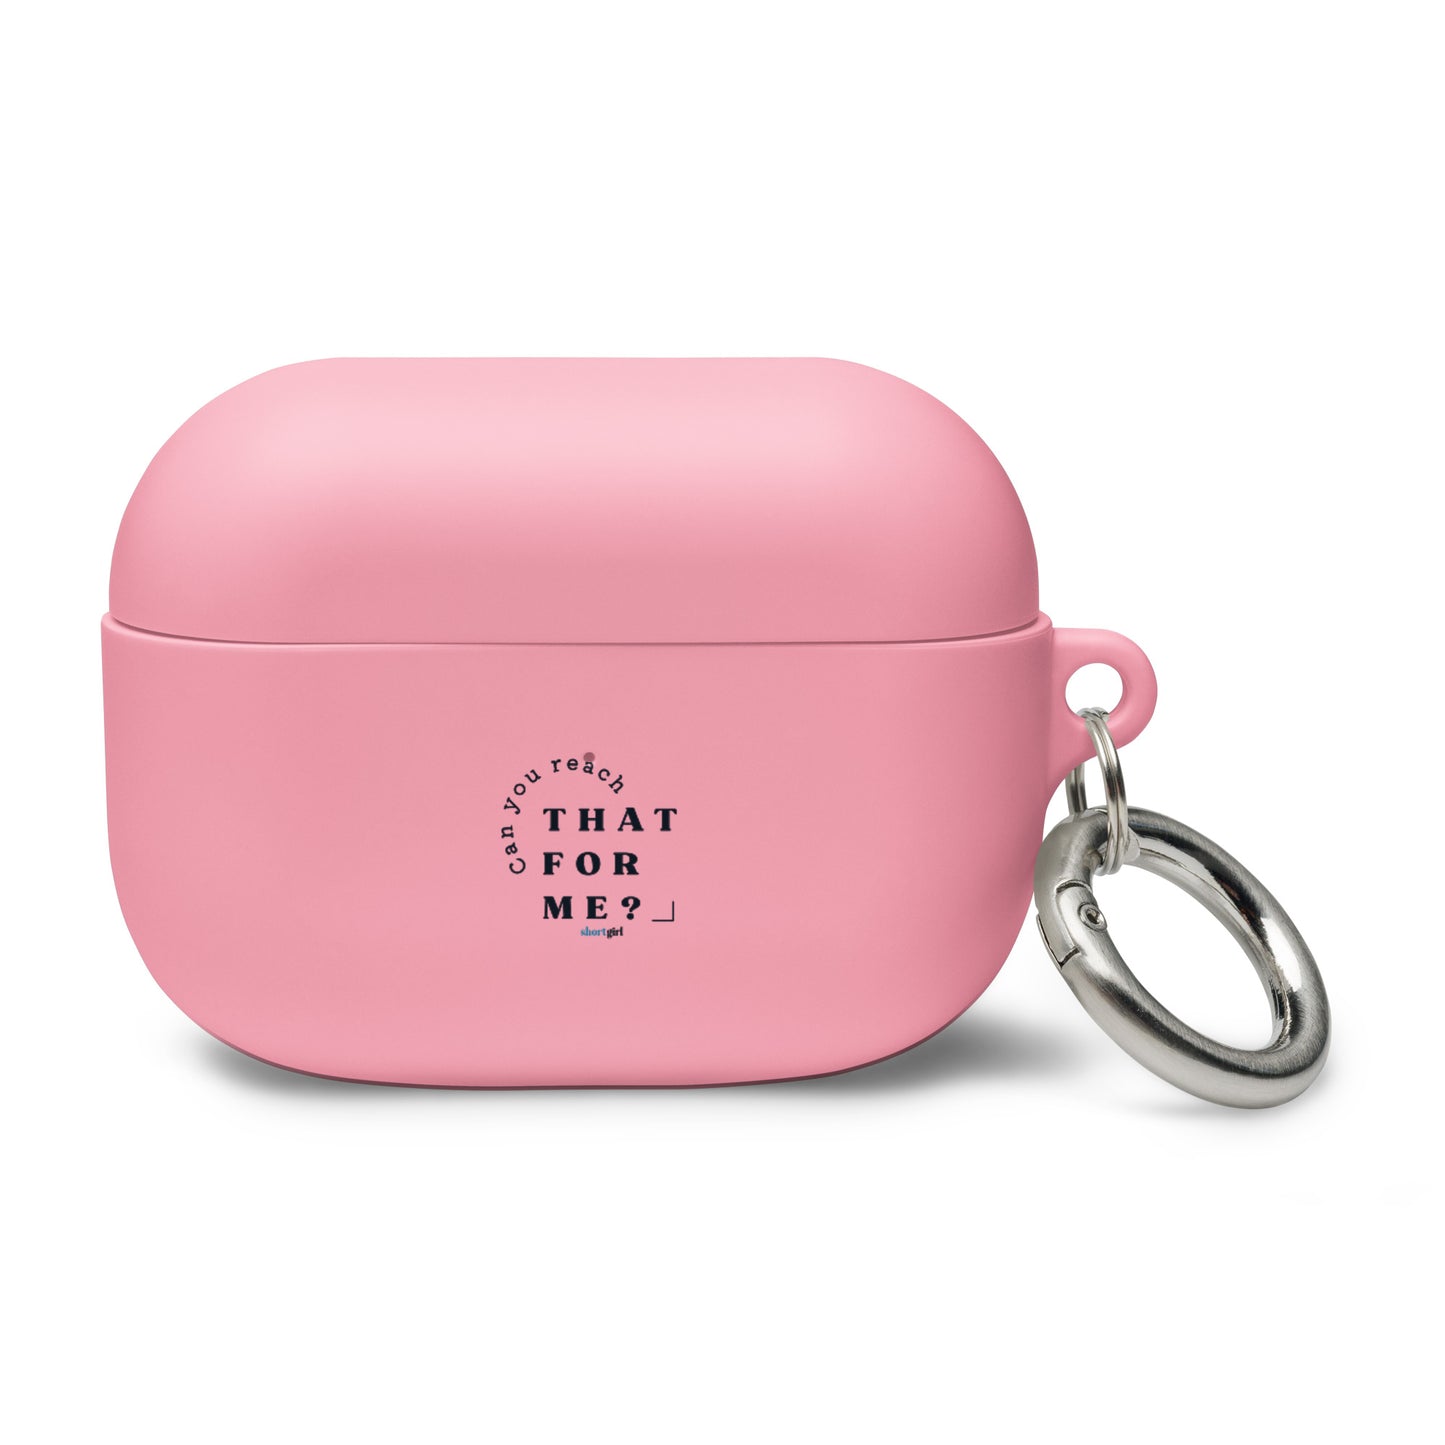 AirPods case - Can you reach that for me?